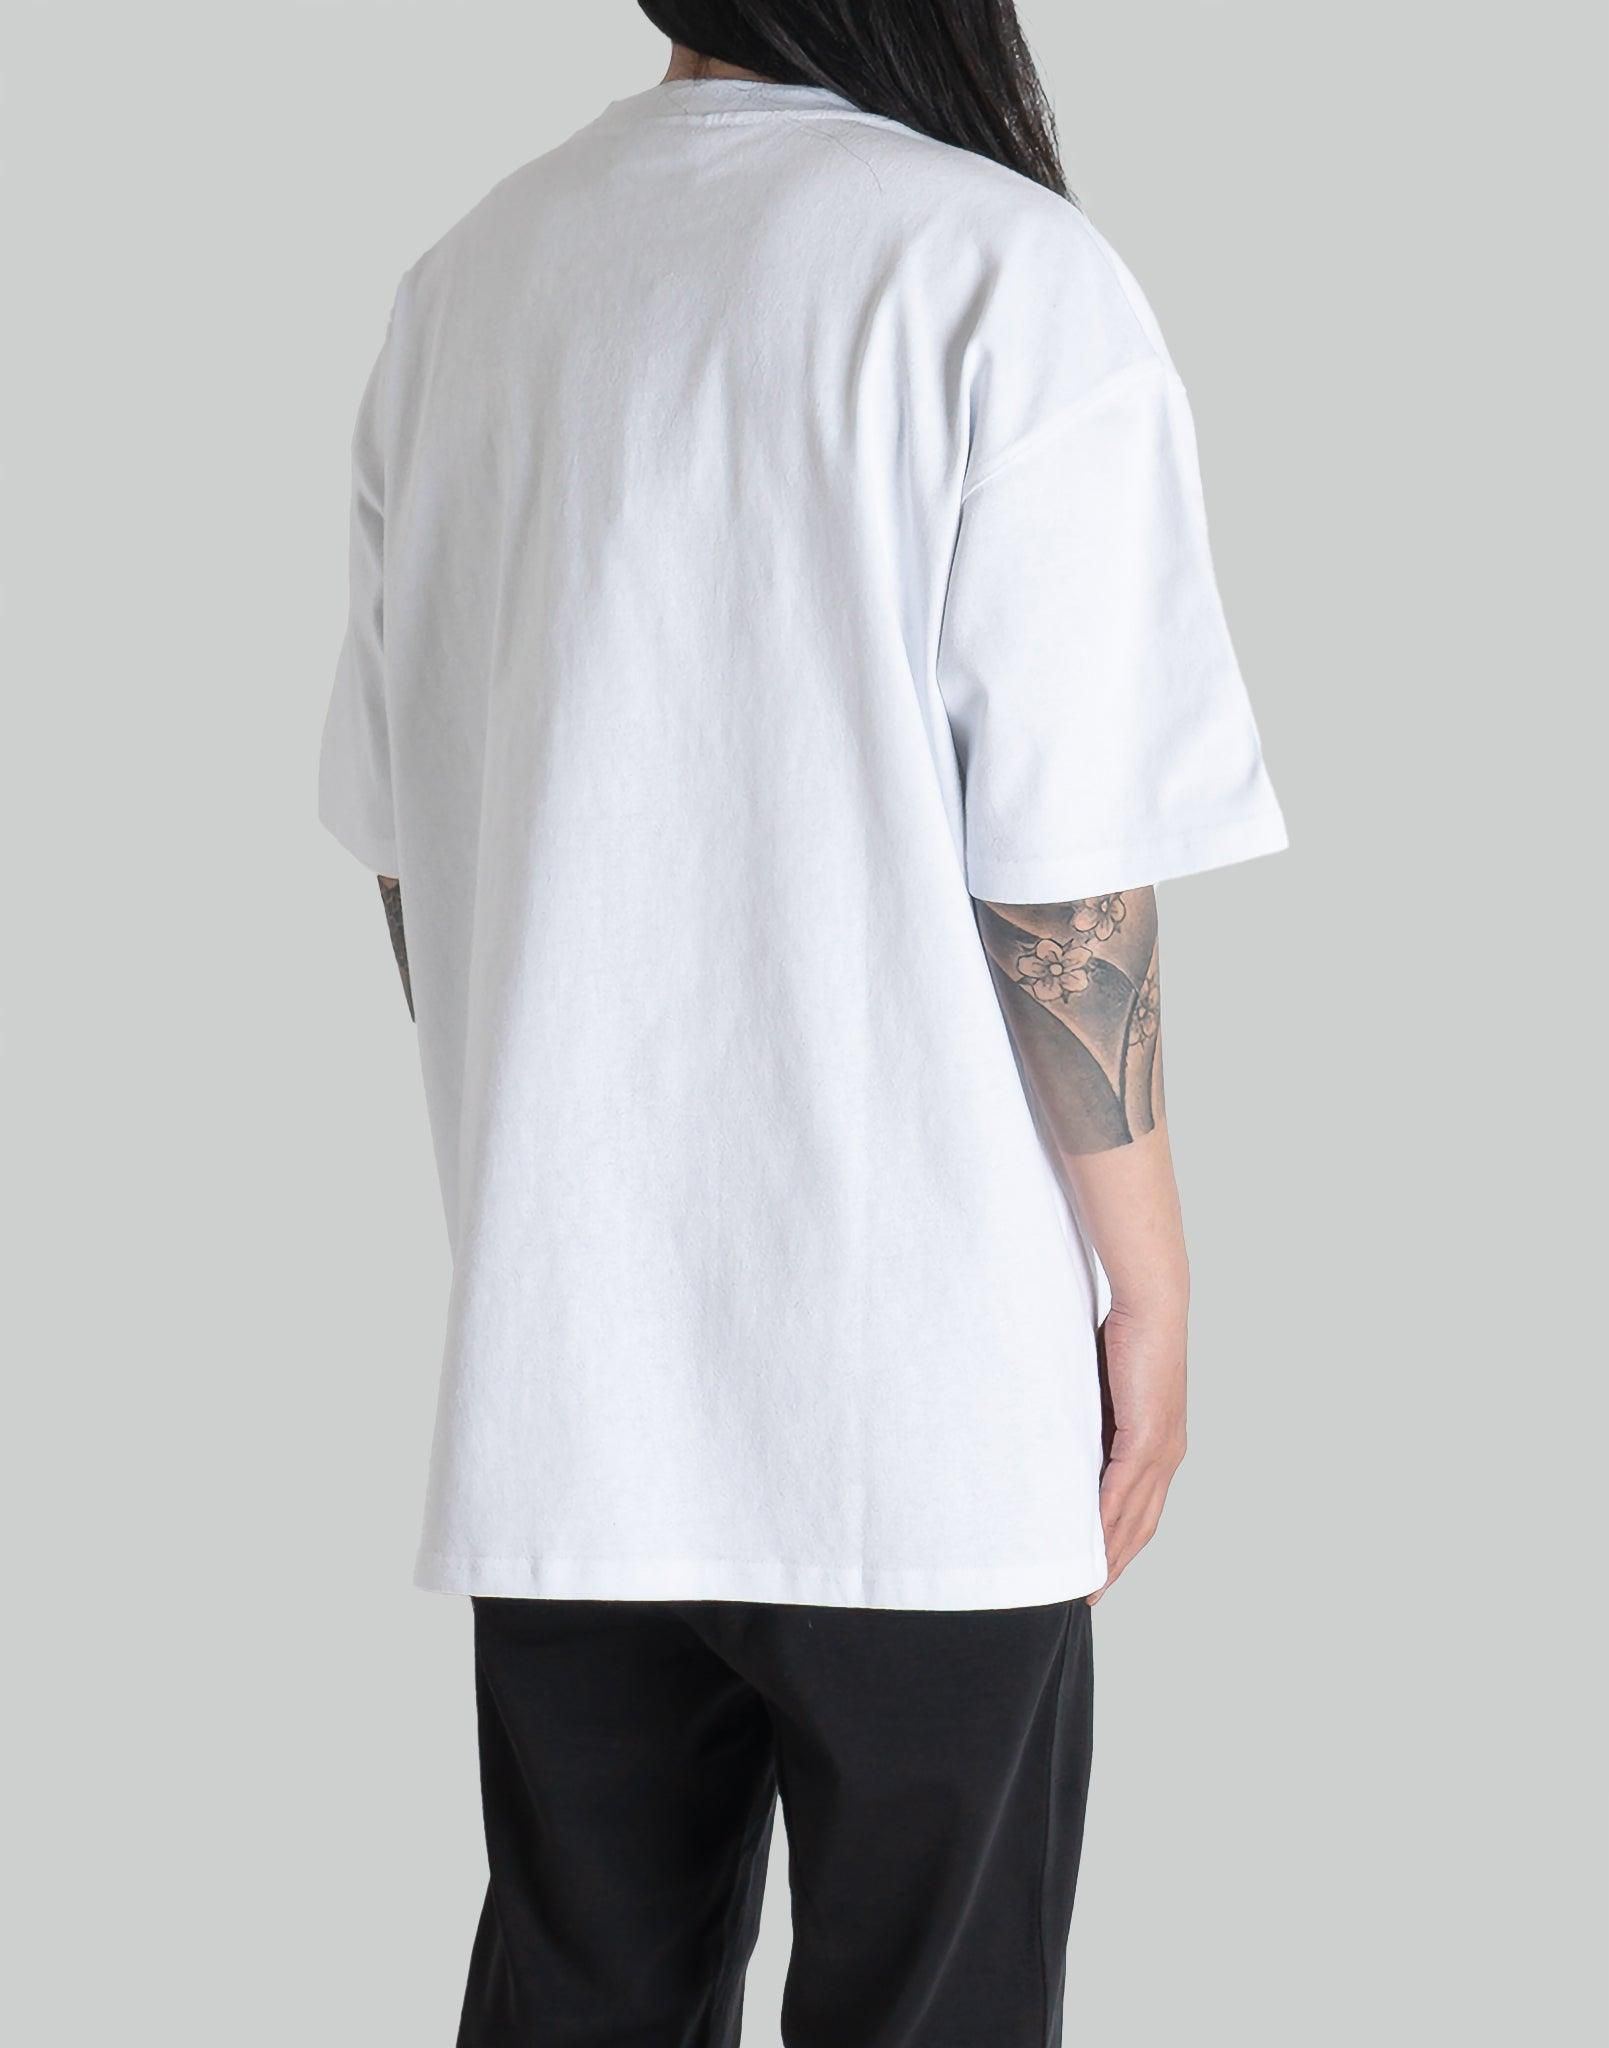 NISHIMOTO IS THE MOUTH PHOTO S/S TEE - 082plus